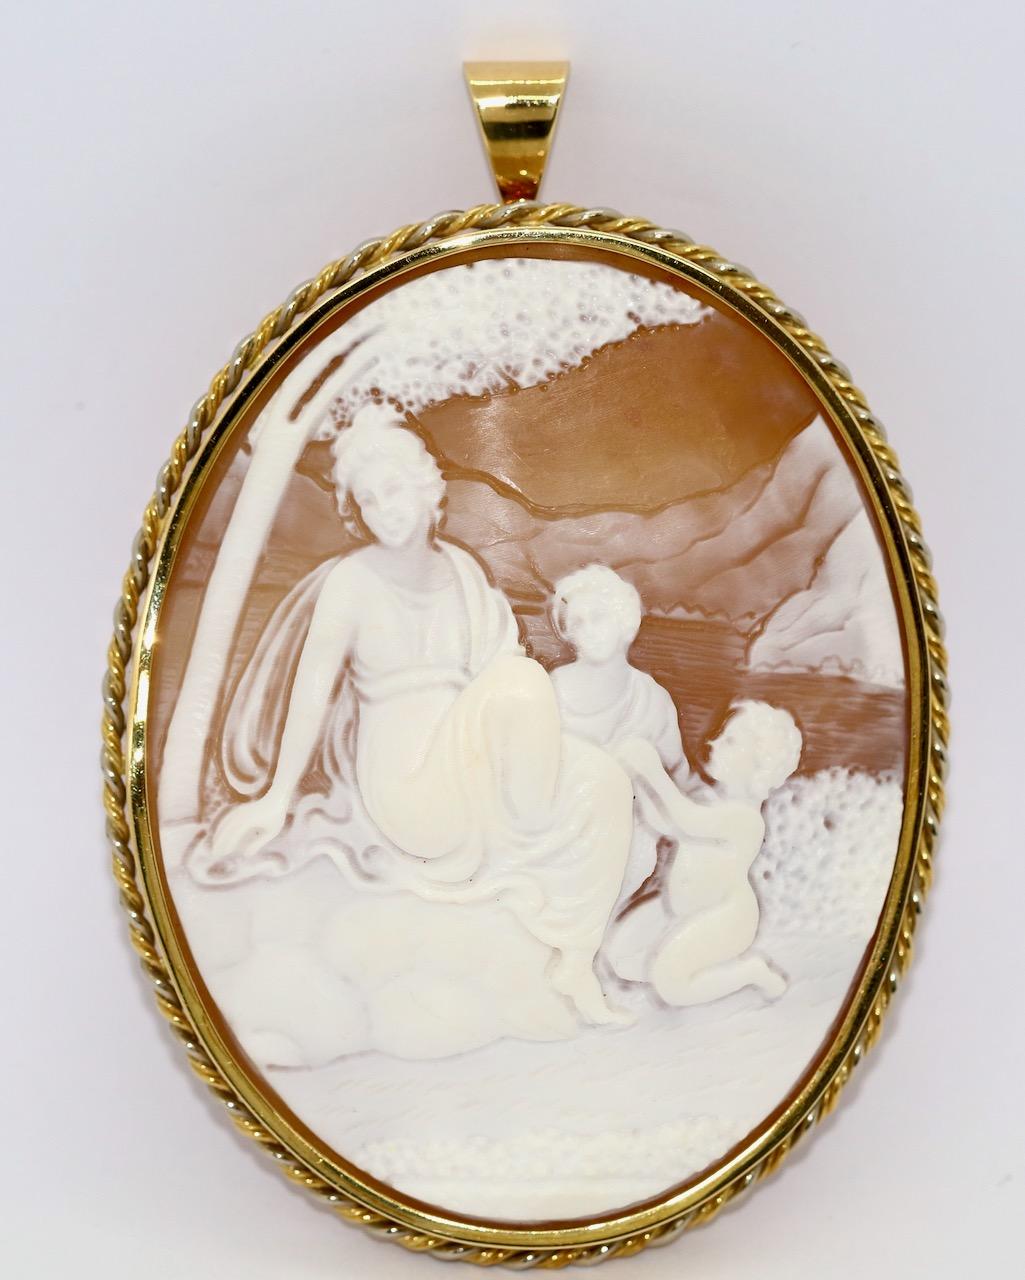 Magnificent, old and Large Oversized Cameo Brooch, Pendant, 18 Karat Gold.

Very good condition. Dimensions measured without eyelet. Hallmarked with 